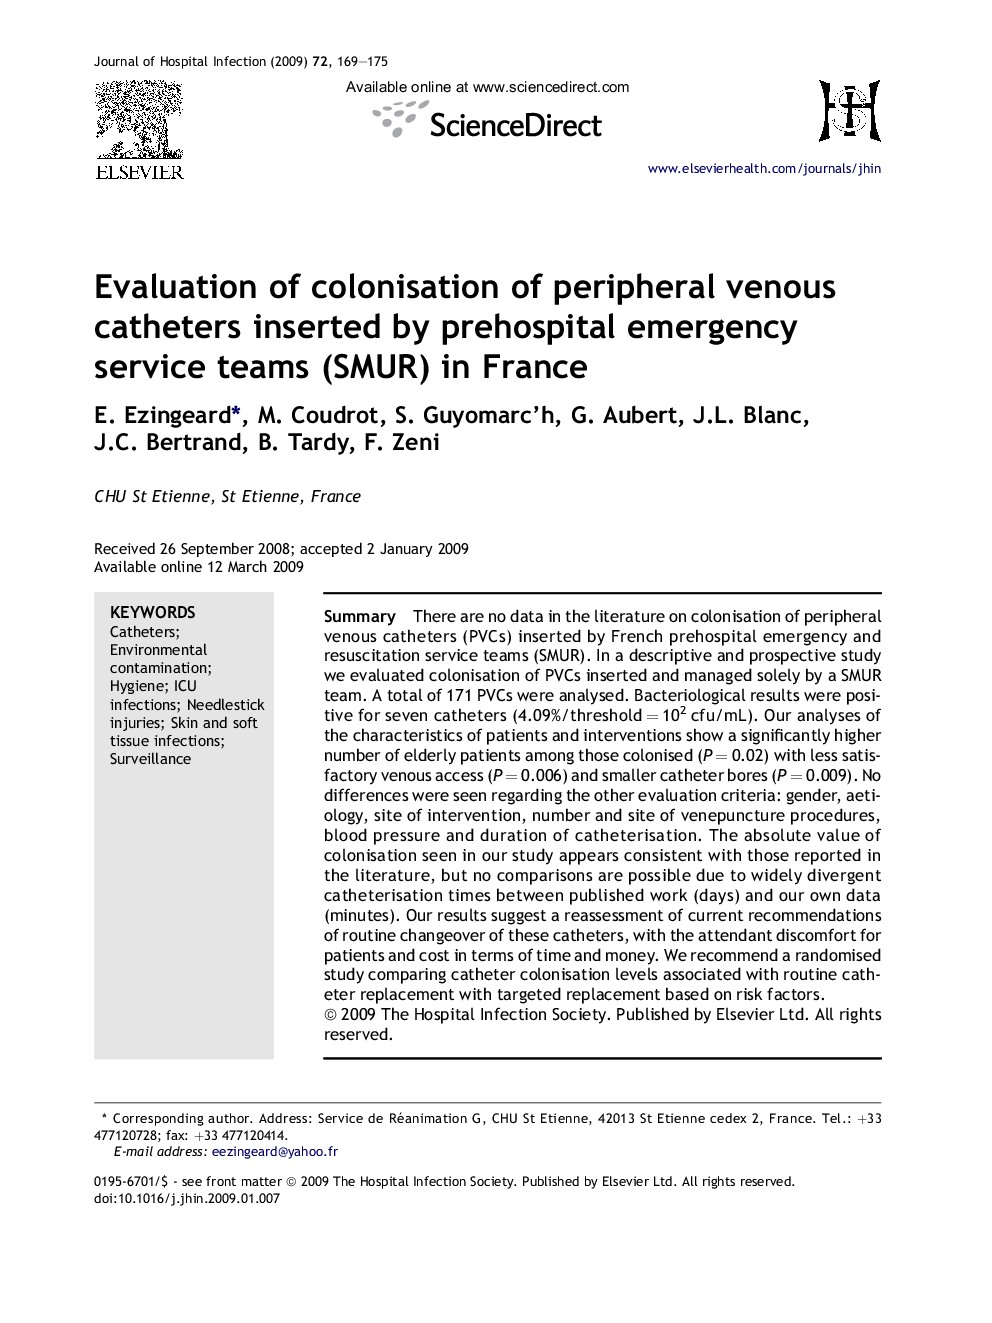 Evaluation of colonisation of peripheral venous catheters inserted by prehospital emergency service teams (SMUR) in France